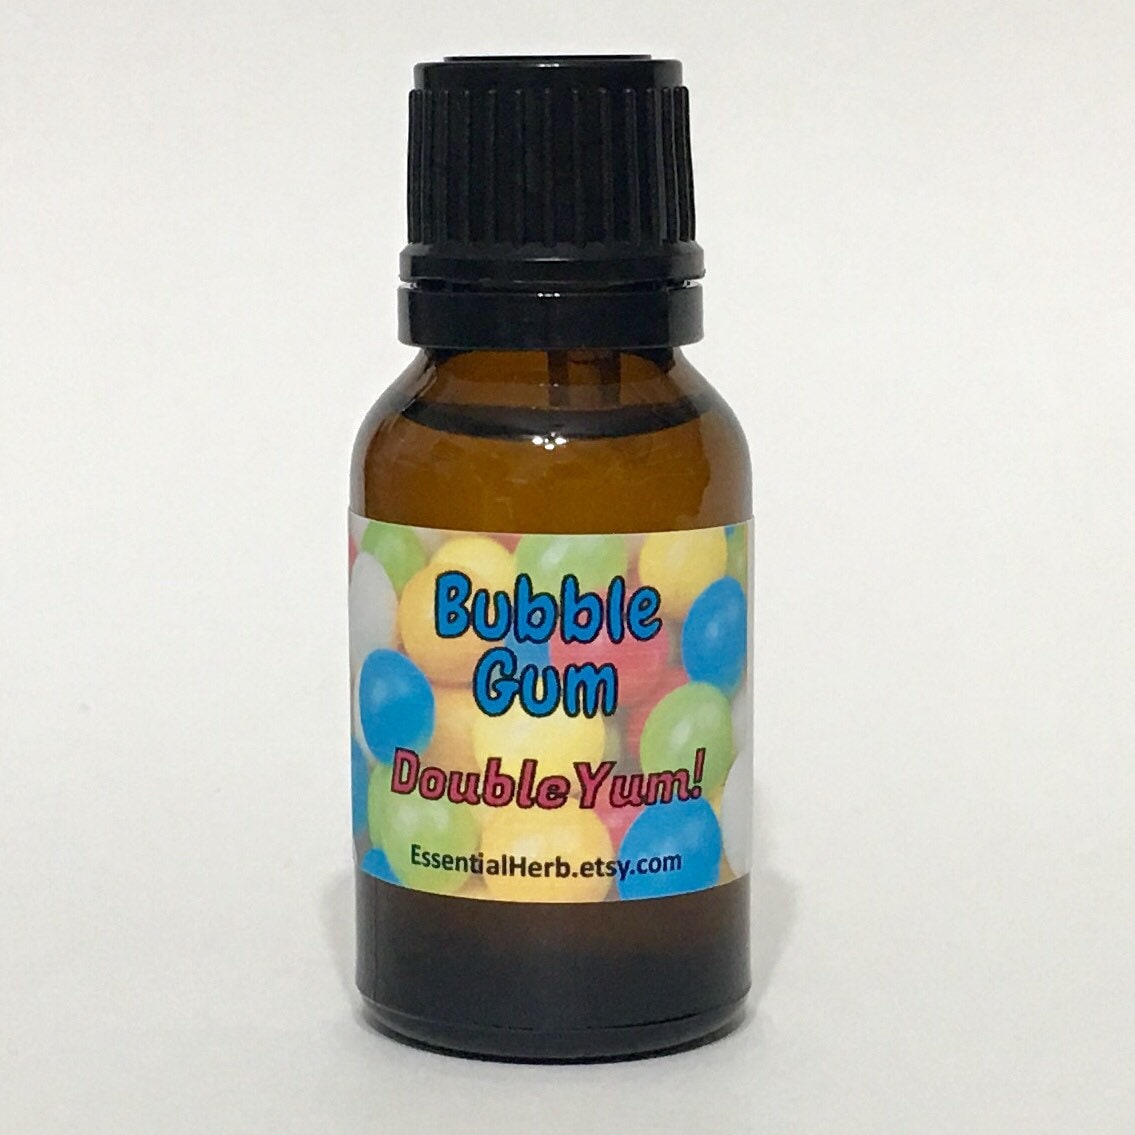 Bubble Gum Essential Oil Diffusing Blend, Child Safe Aromatherapy, Healthy Immune, Respiratory Oil, Calming